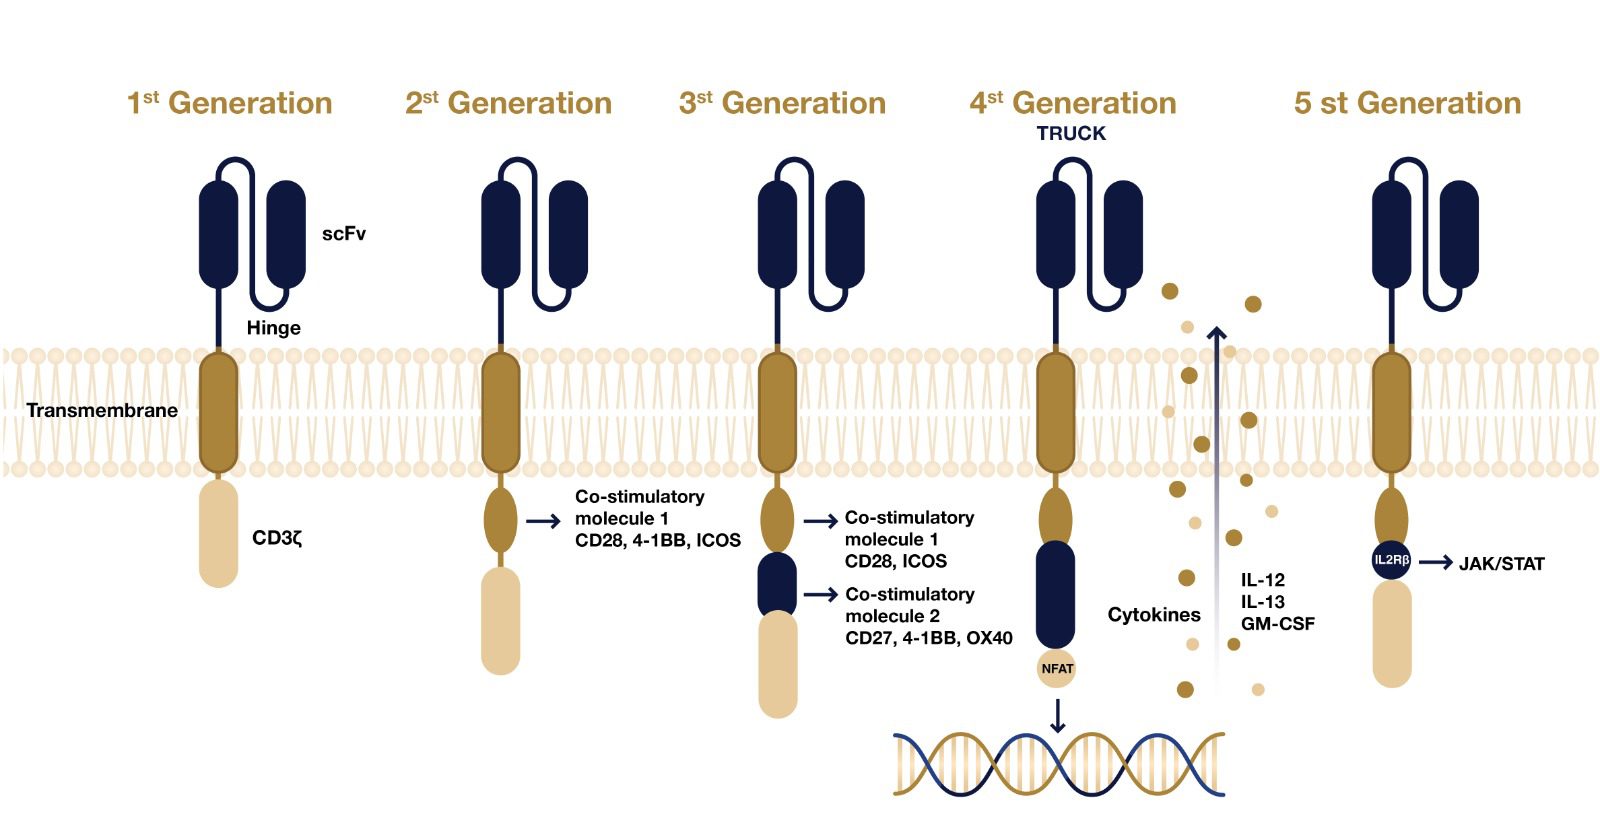 Visual representation of how CAR-T structure has evolved from first generation, to second , third, fourth and fifth generation. 